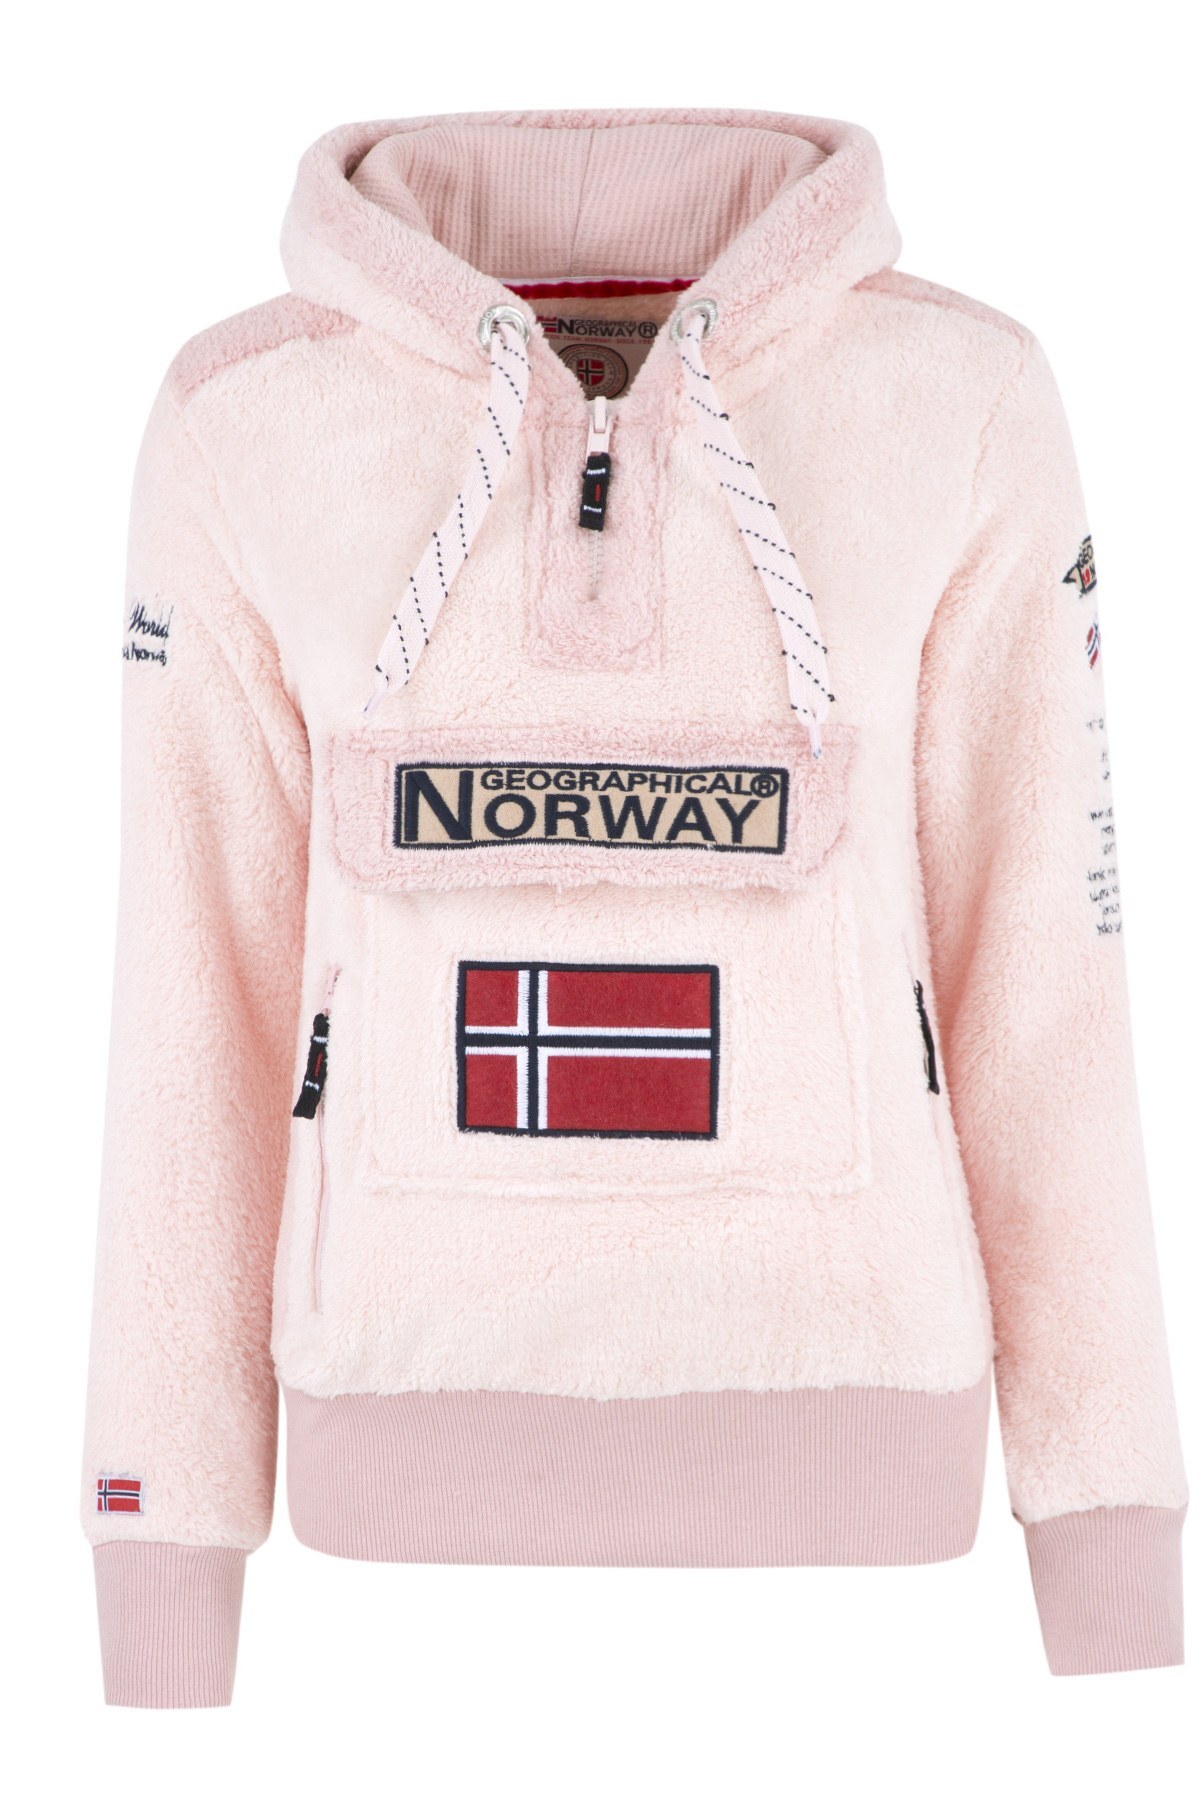 Norway Geographical Outdoor Bayan Sweat GYMCLASS PEMBE